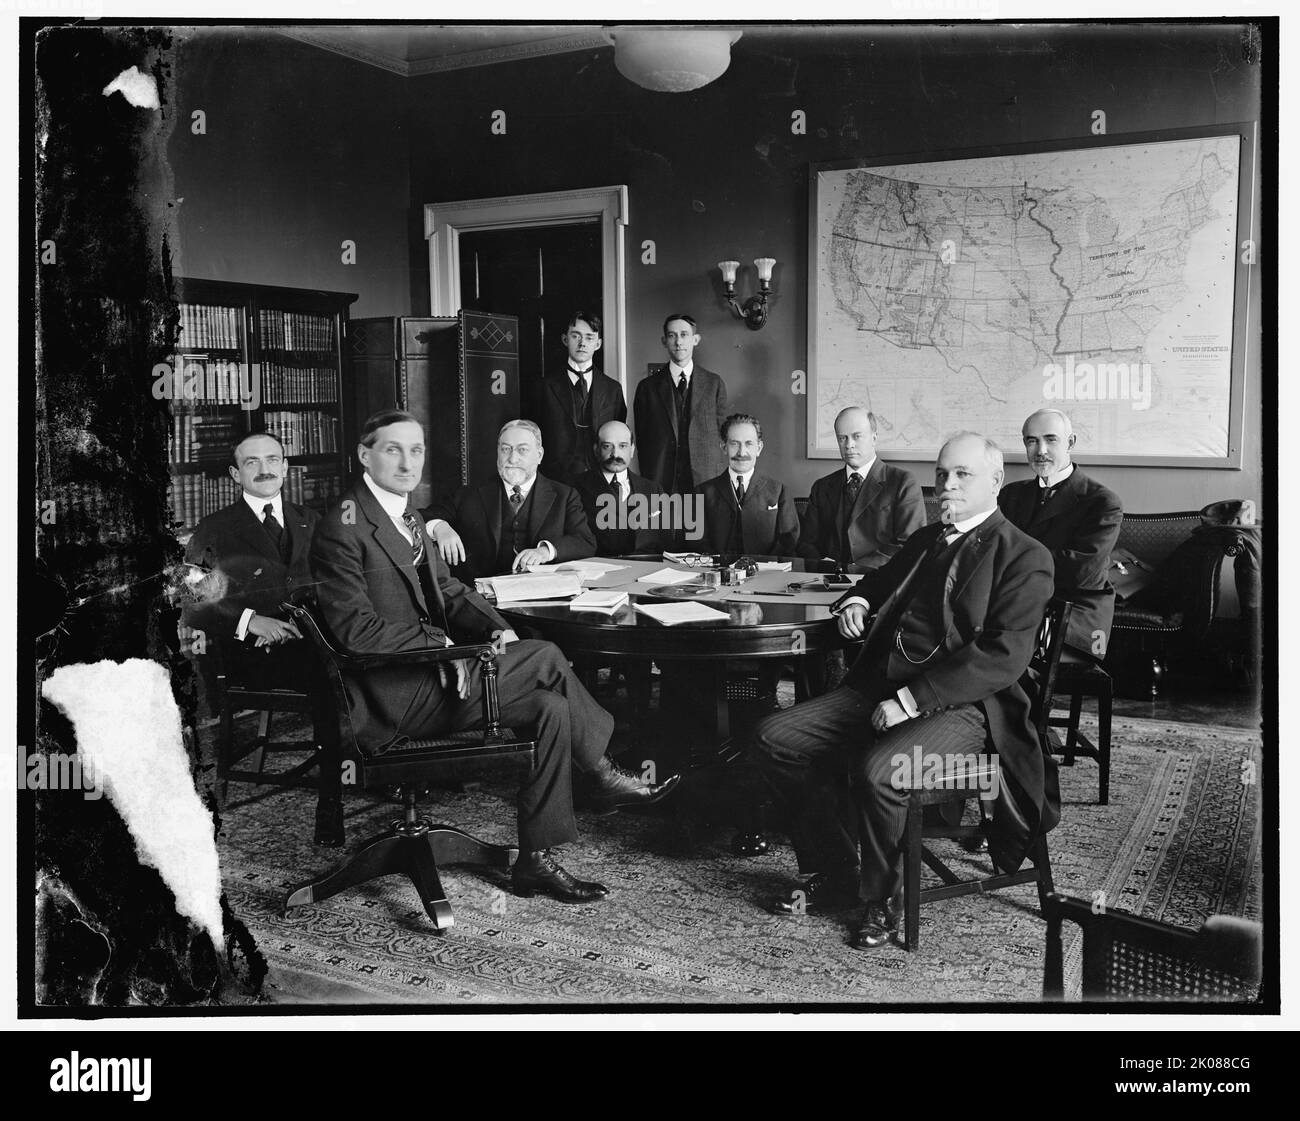 International High Commission, between 1910 and 1920. American lawyer and politician William Gibbs McAdoo Jr. (2nd left) was the husband of Eleanor Wilson McAdoo, (daughter of president Woodrow Wilson). Note map on wall of United States Territories and Insular Possessions, showing 'Original Thirteen States'. Stock Photo